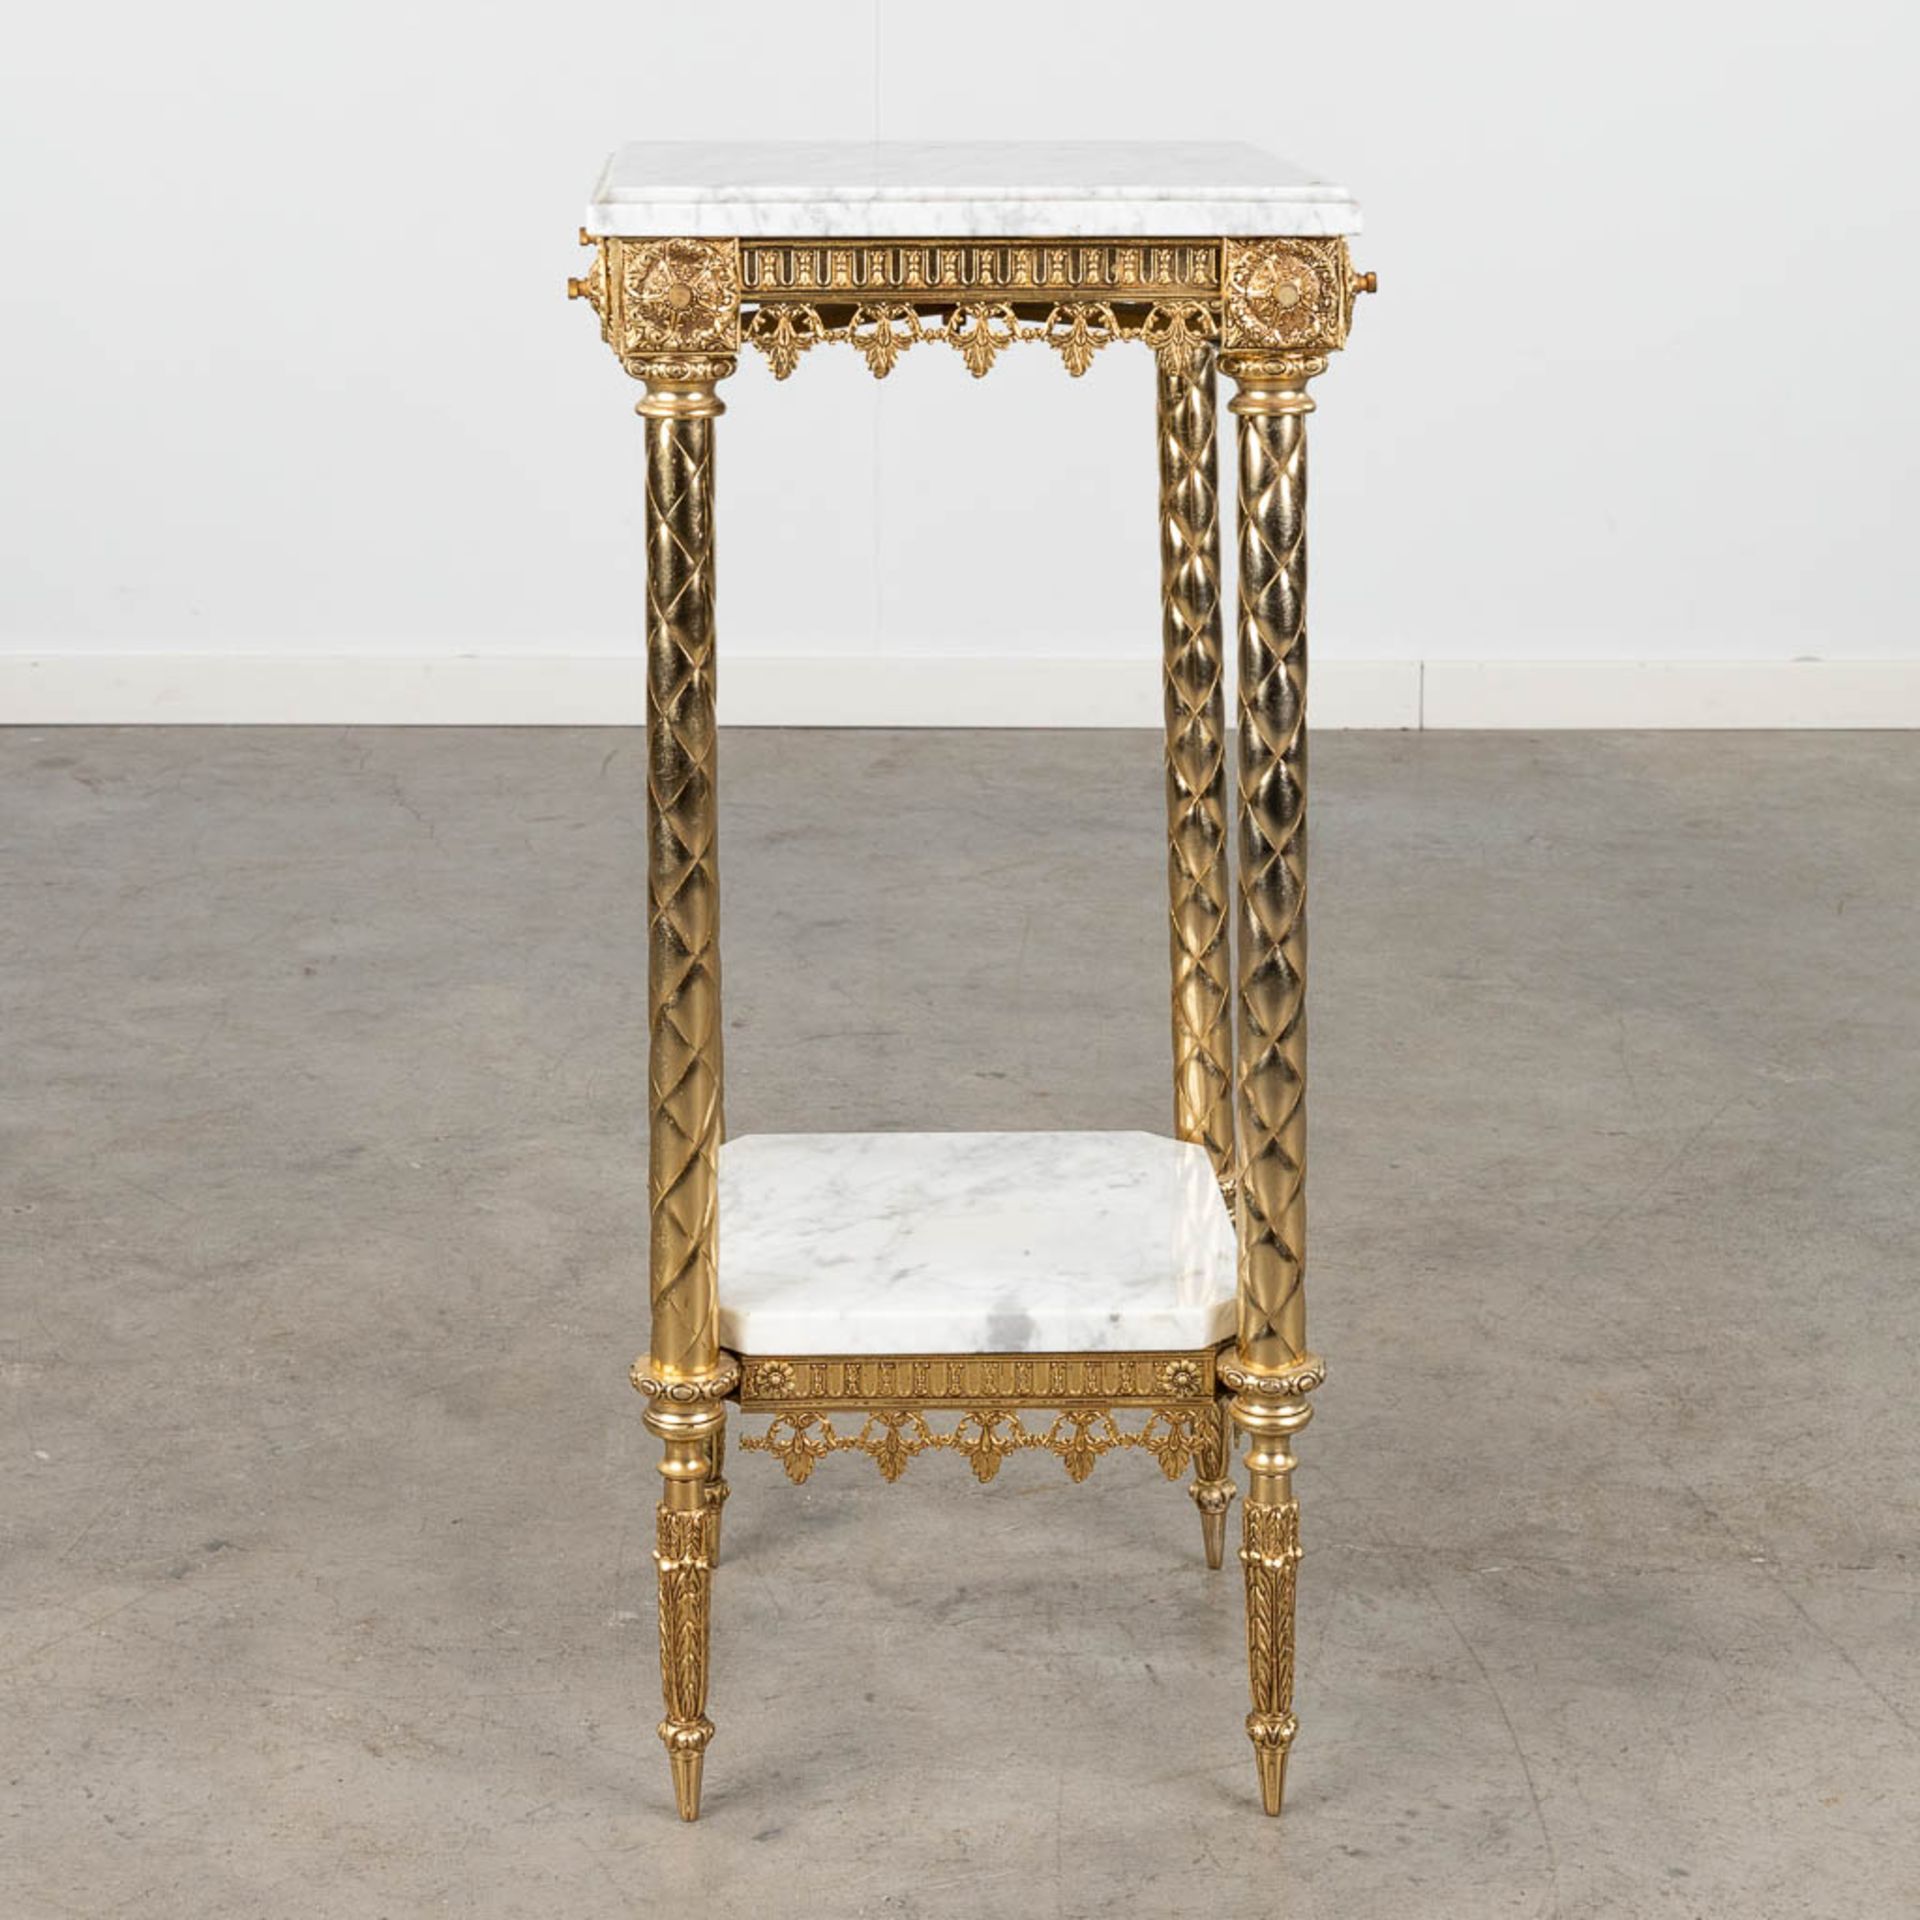 A pedestal, brass and white marble. 20th C. (L: 34 x W: 34 x H: 72 cm) - Image 4 of 11